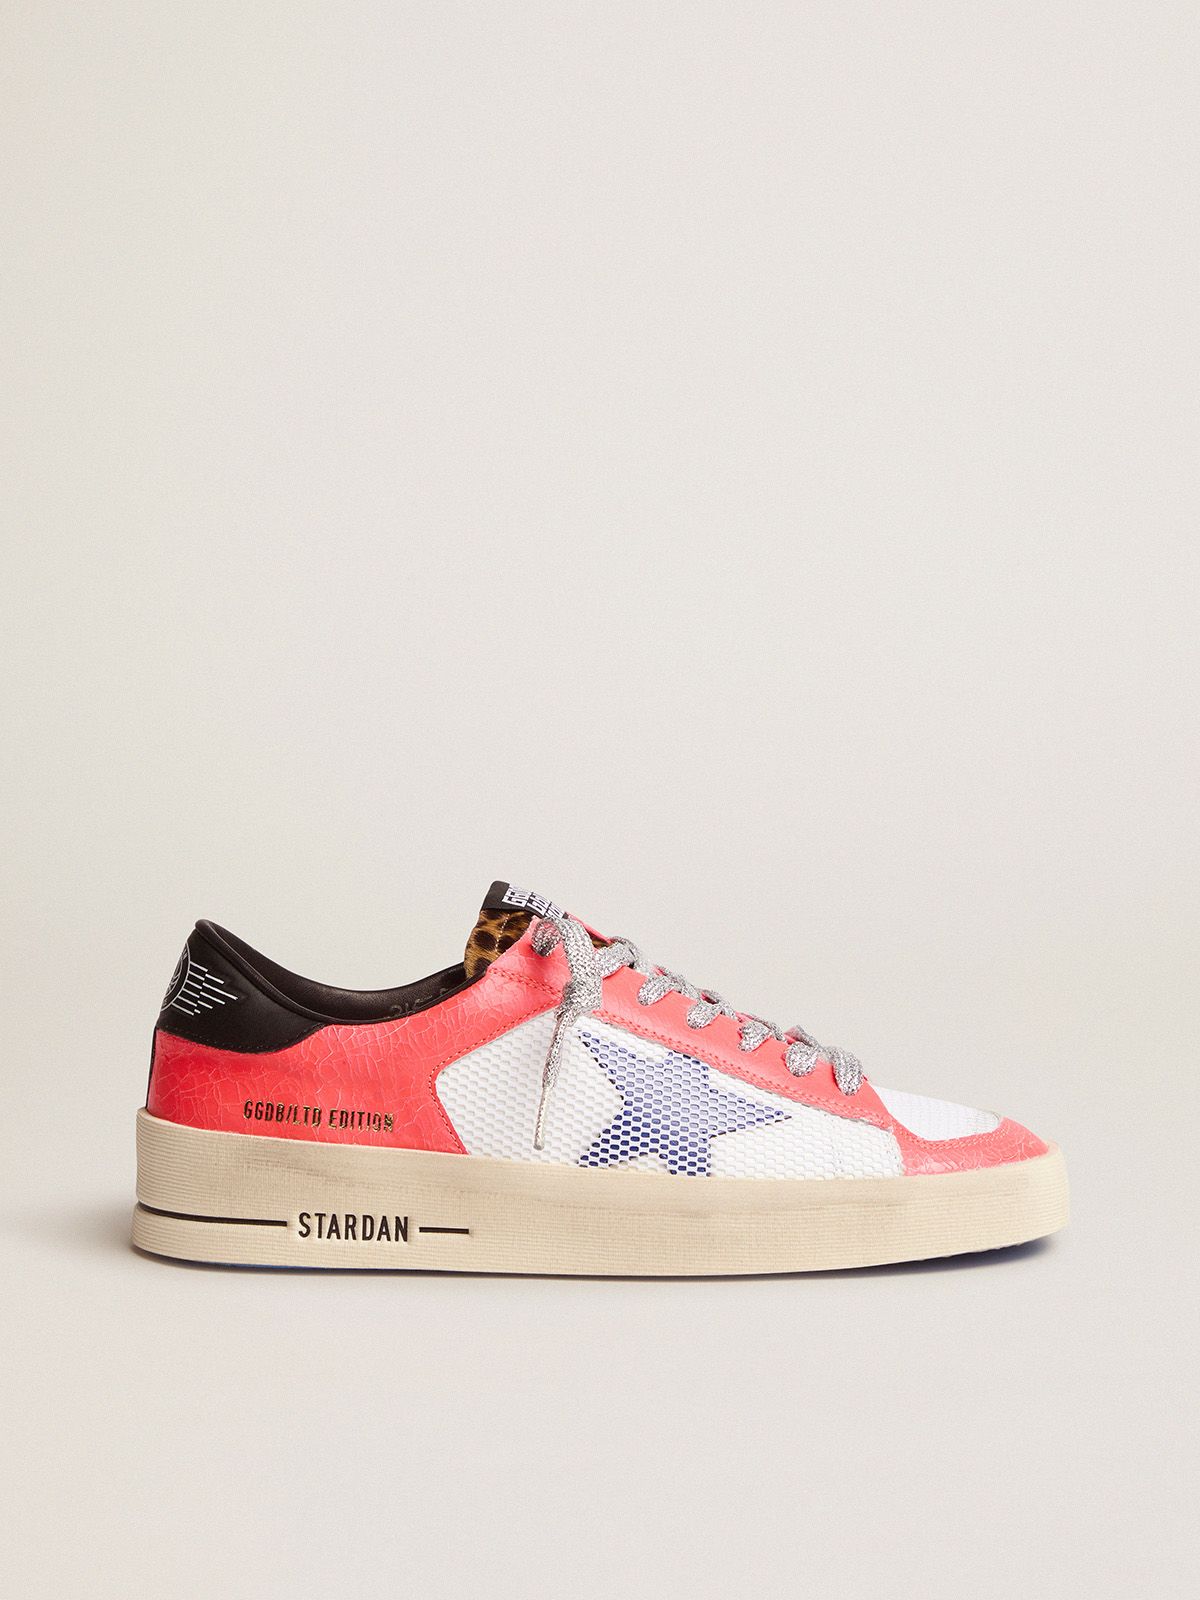 Women's LAB Limited Edition Stardan sneakers in craquelé leather and pony skin